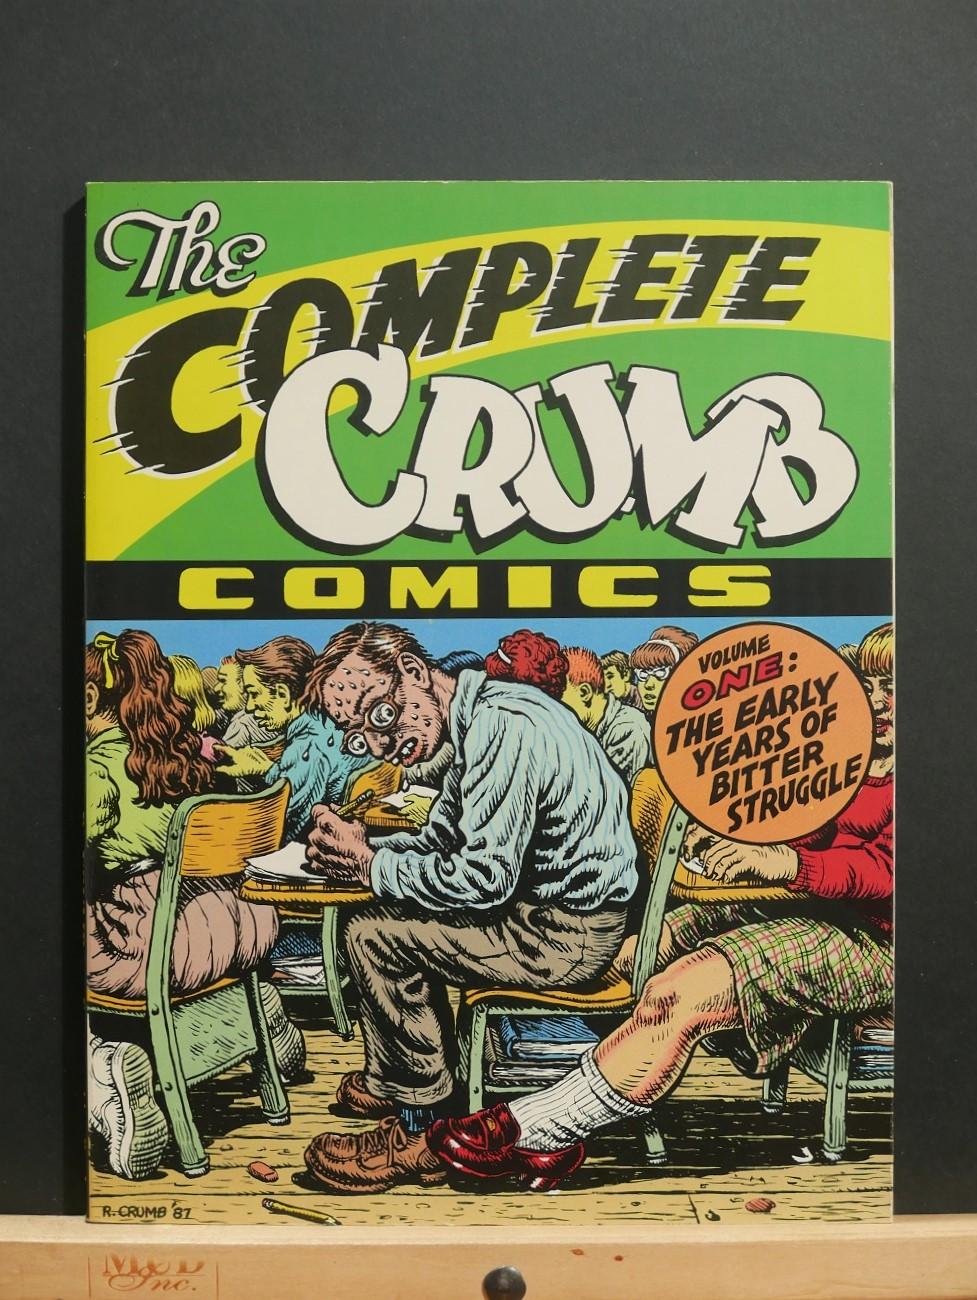 The Complete Crumb Comics Vol. 1: The Early Years of Bitter Struggle by  Crumb, Robert: (1987) 1st Edition Comic | Tree Frog Fine Books and Graphic  Arts